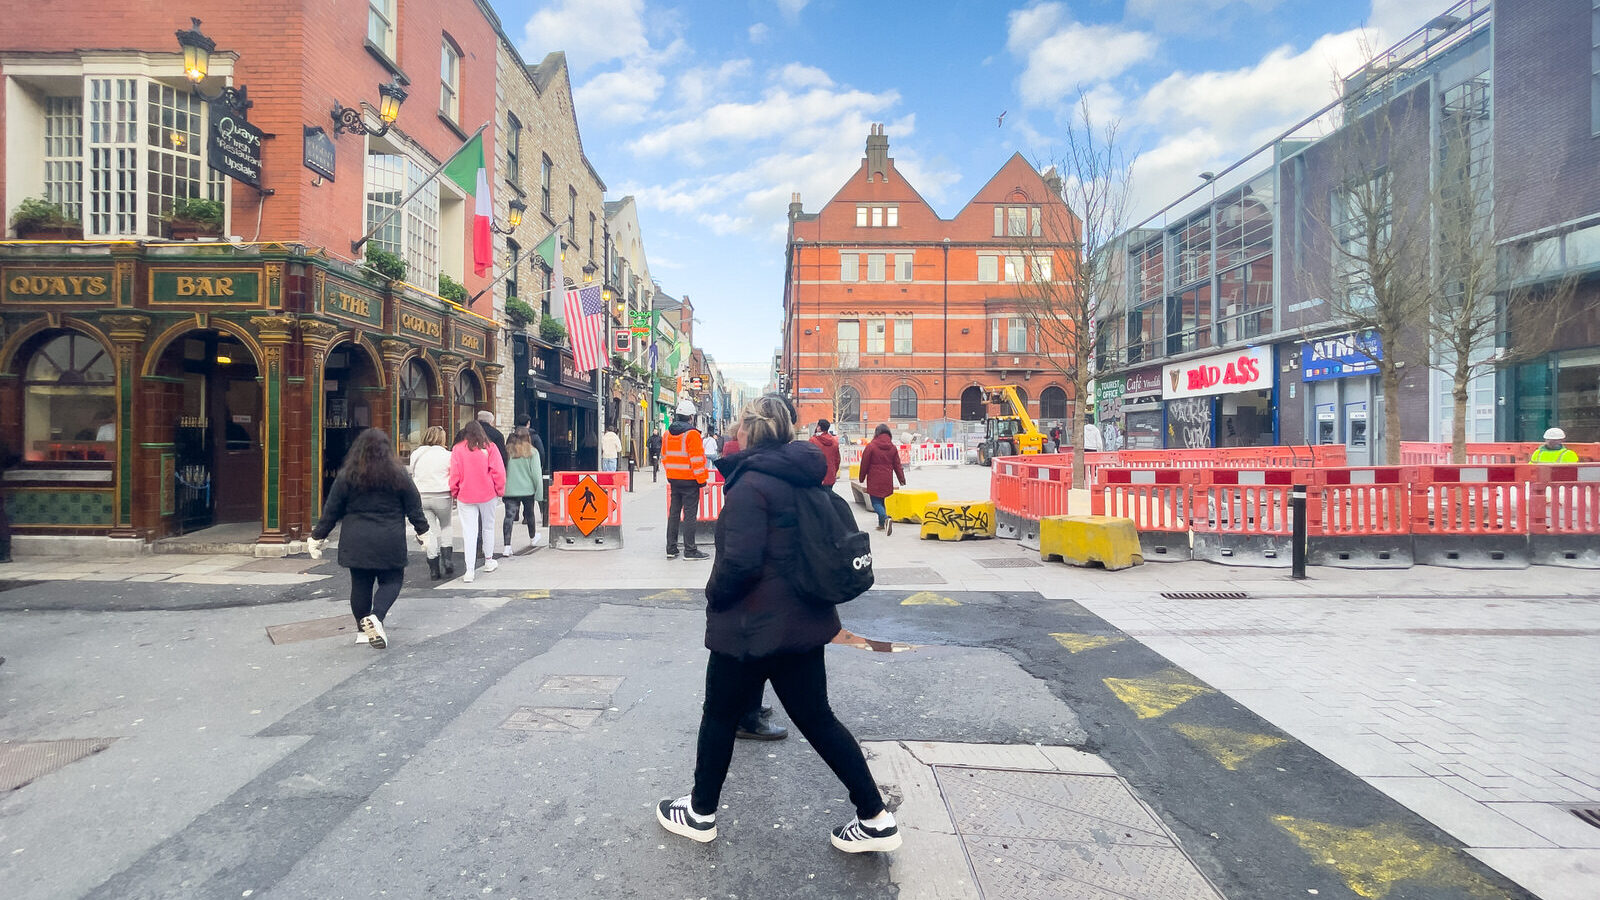 VISITING DUBLIN FOR ST PATRICK'S WEEKEND [IS TEMPLE BAR AS GOOD AS MANY CLAIM IT TO BE?]-229482-1